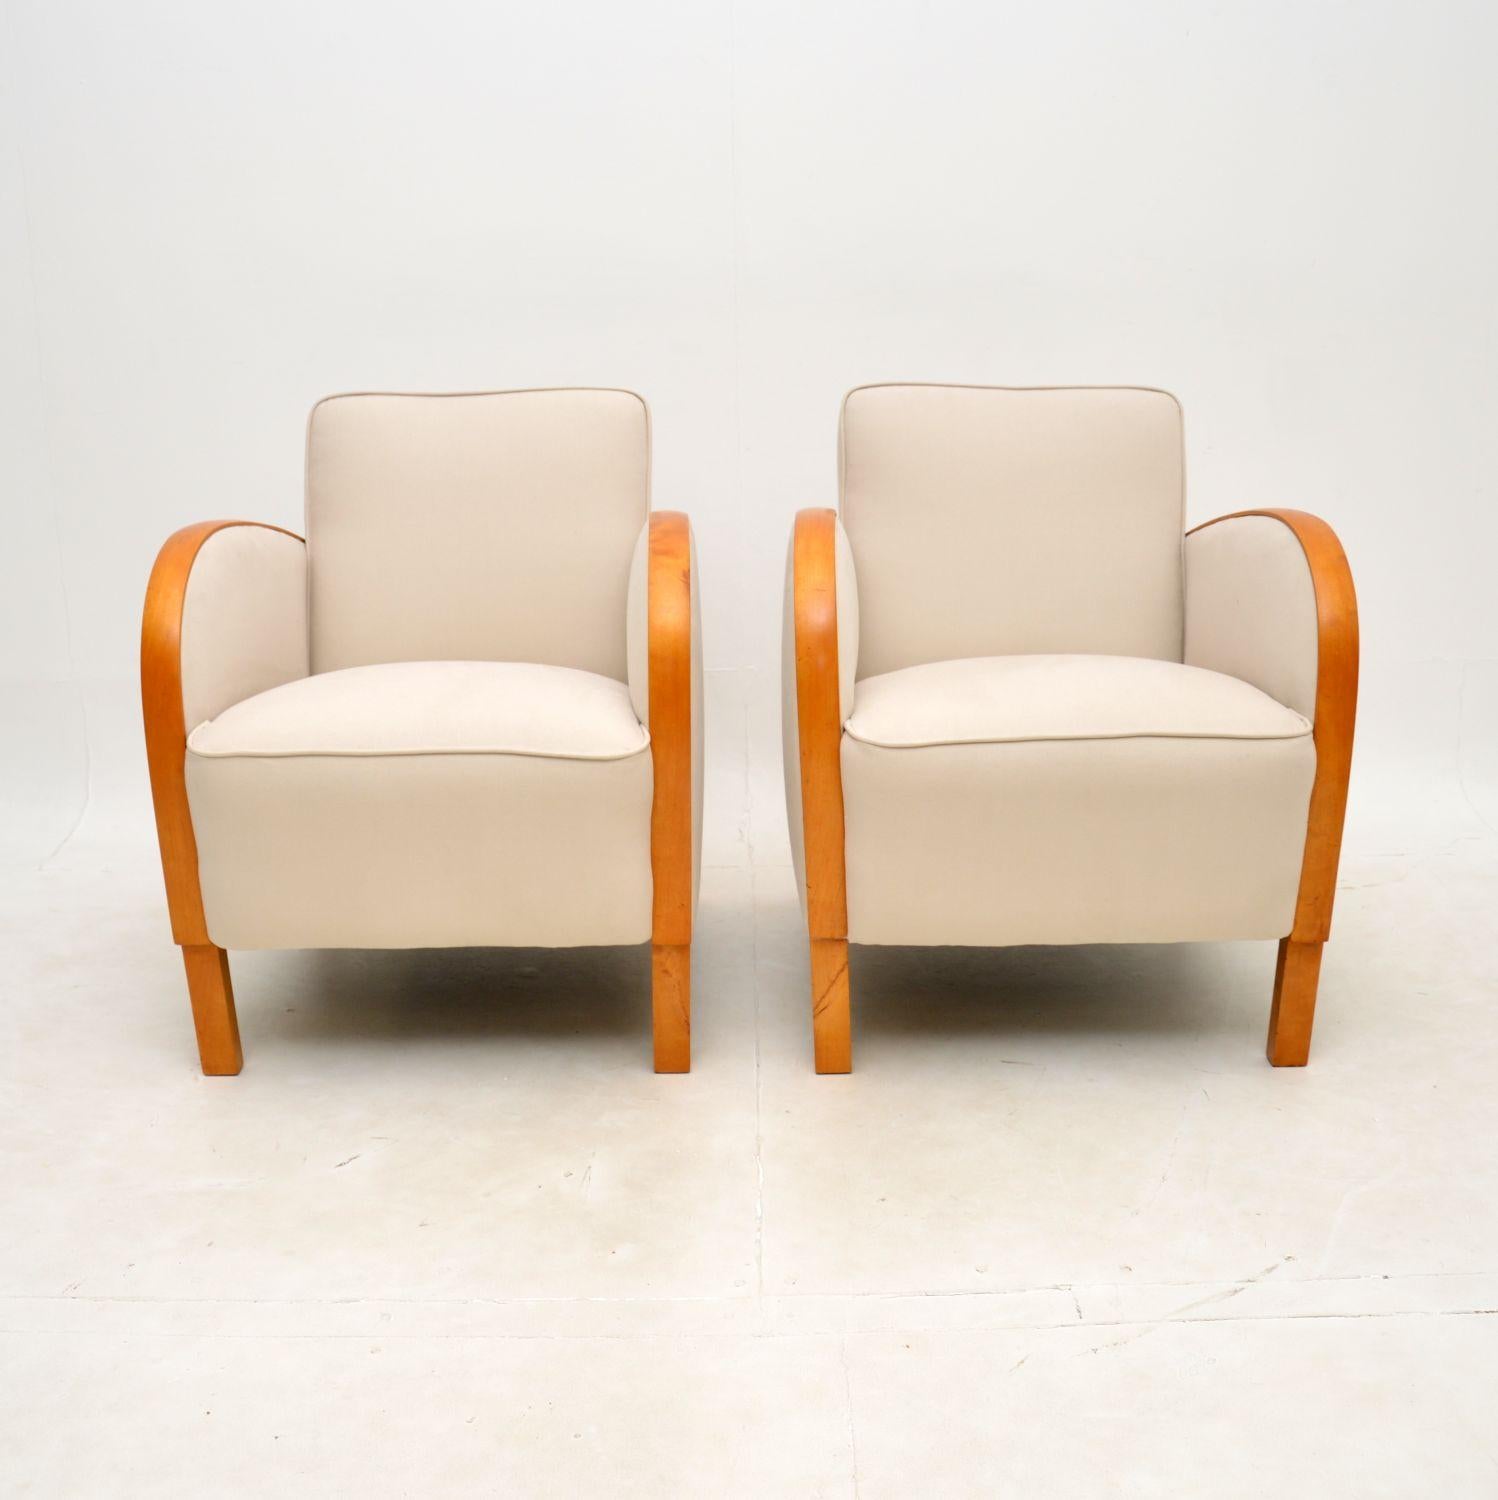 A stylish and very well made pair of Art Deco armchairs in satin birch. They were recently imported from Sweden, they date from the 1930’s.

The quality is excellent, they are well sprung and very comfortable. The sweeping satin birch arms curve